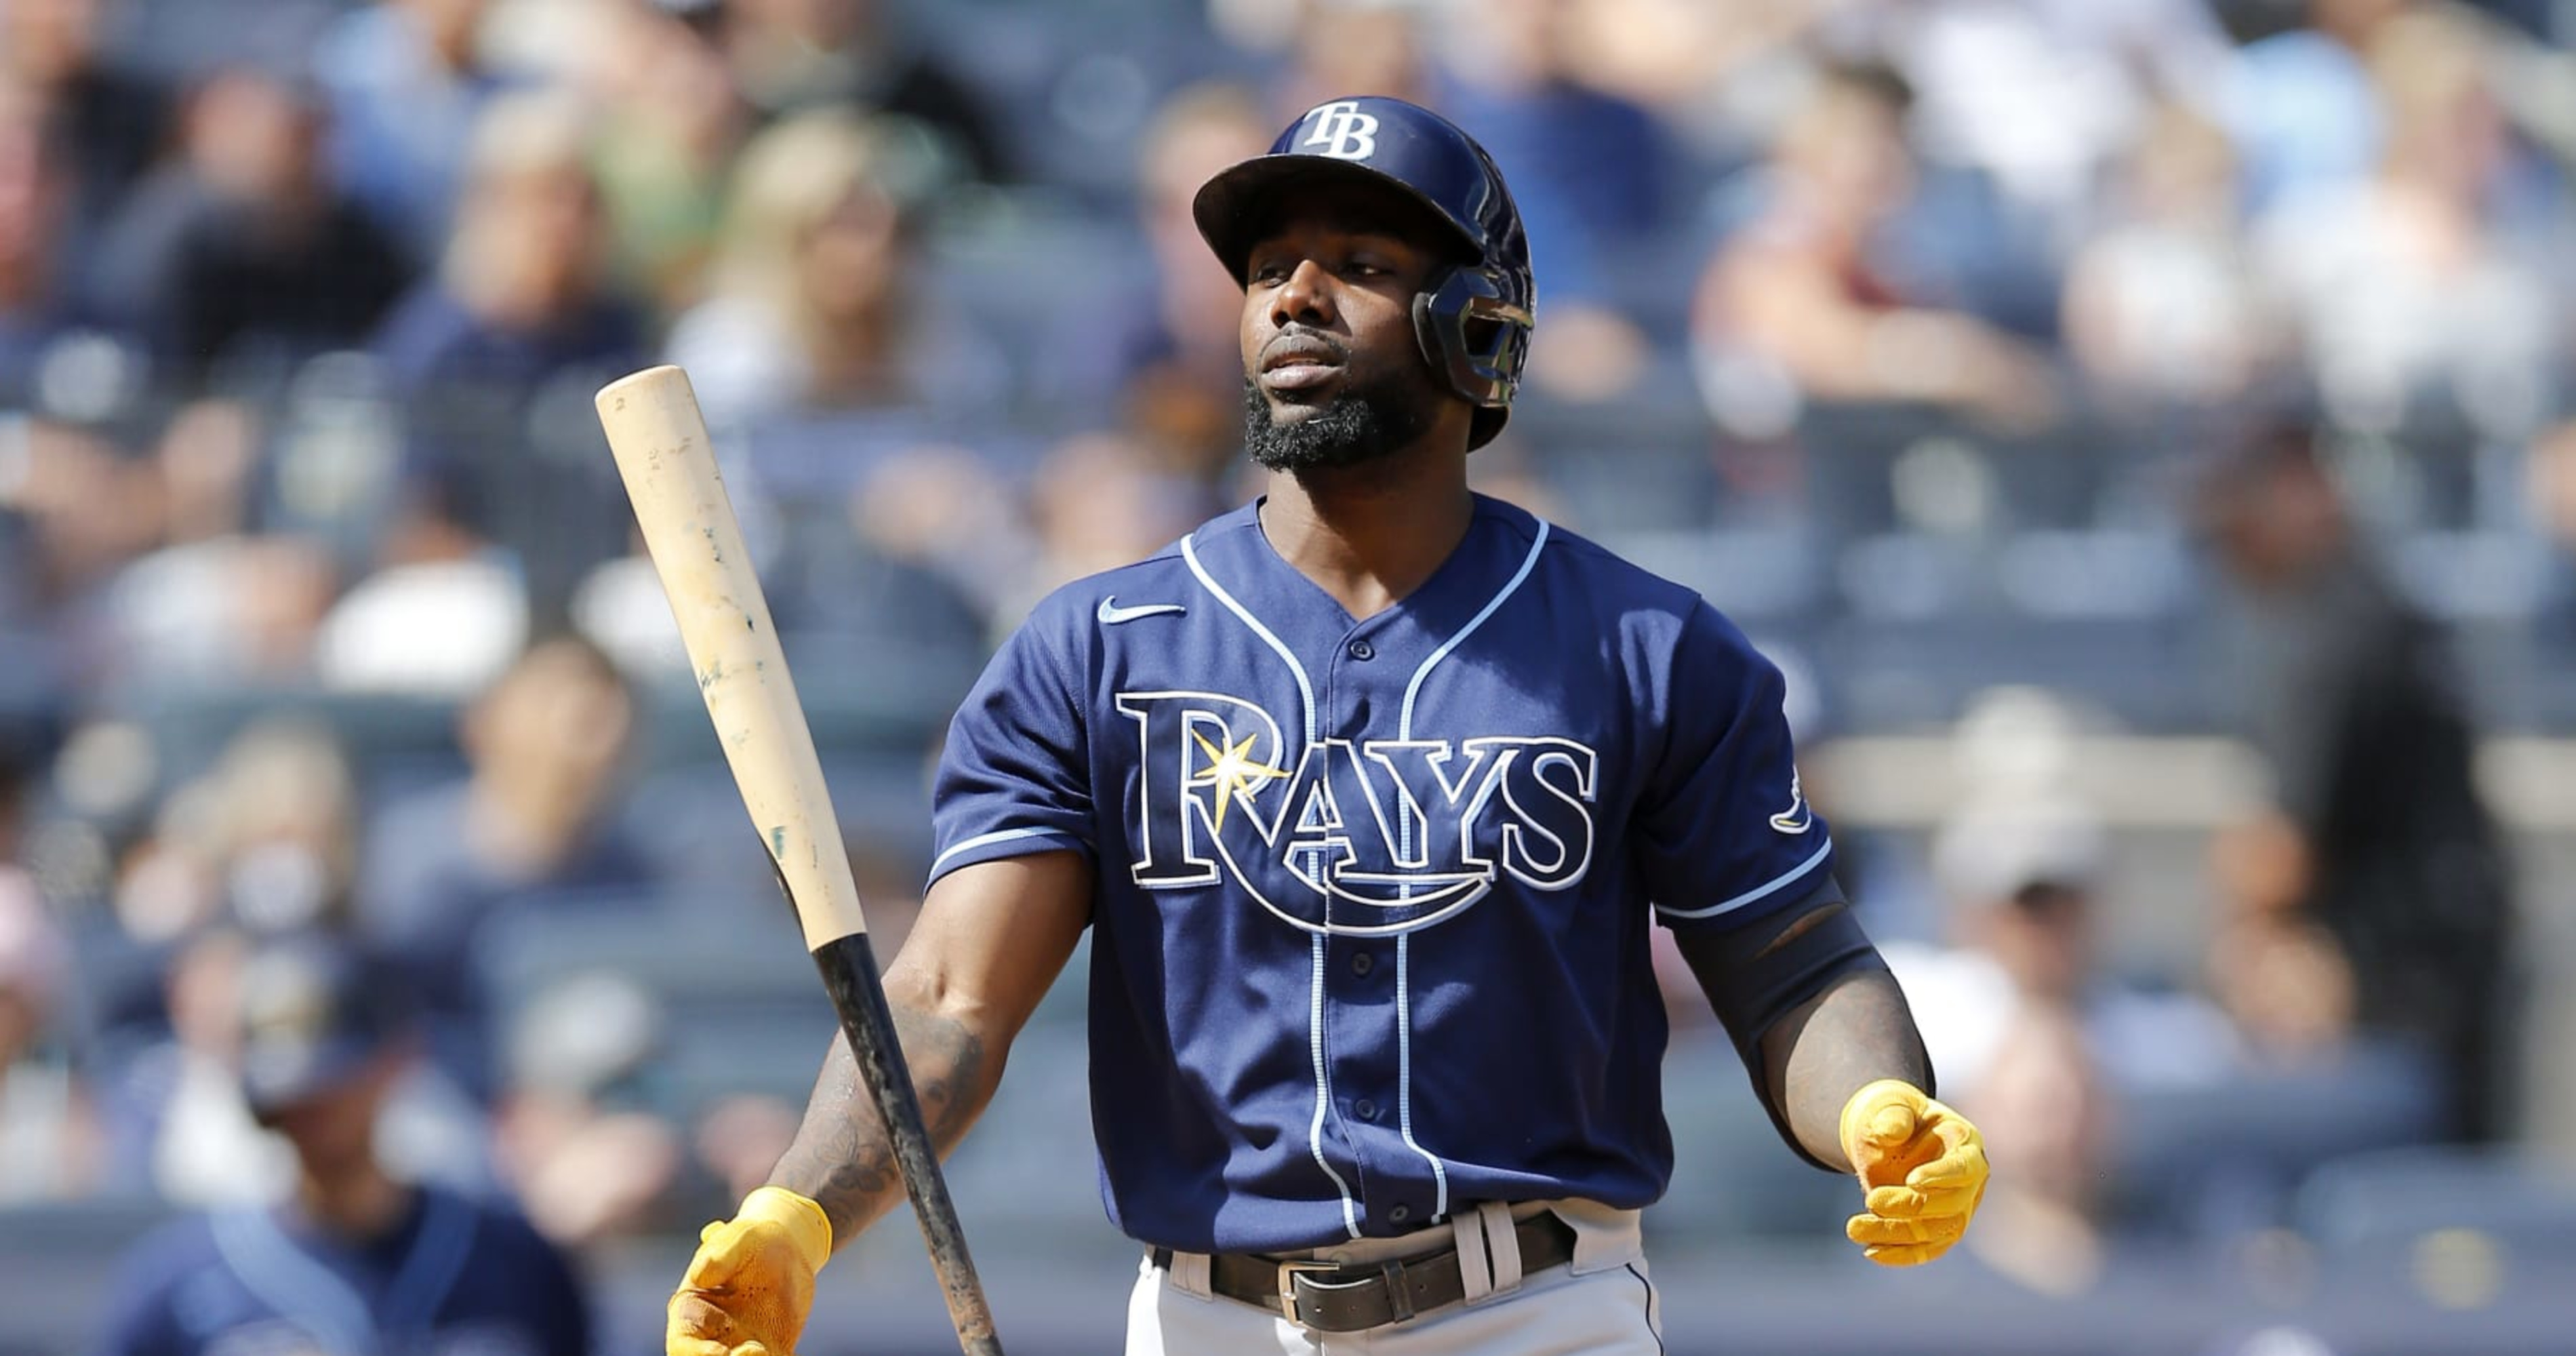 Rays Become 1st Team in MLB History to Start 9 Latino Hitters in Lineup